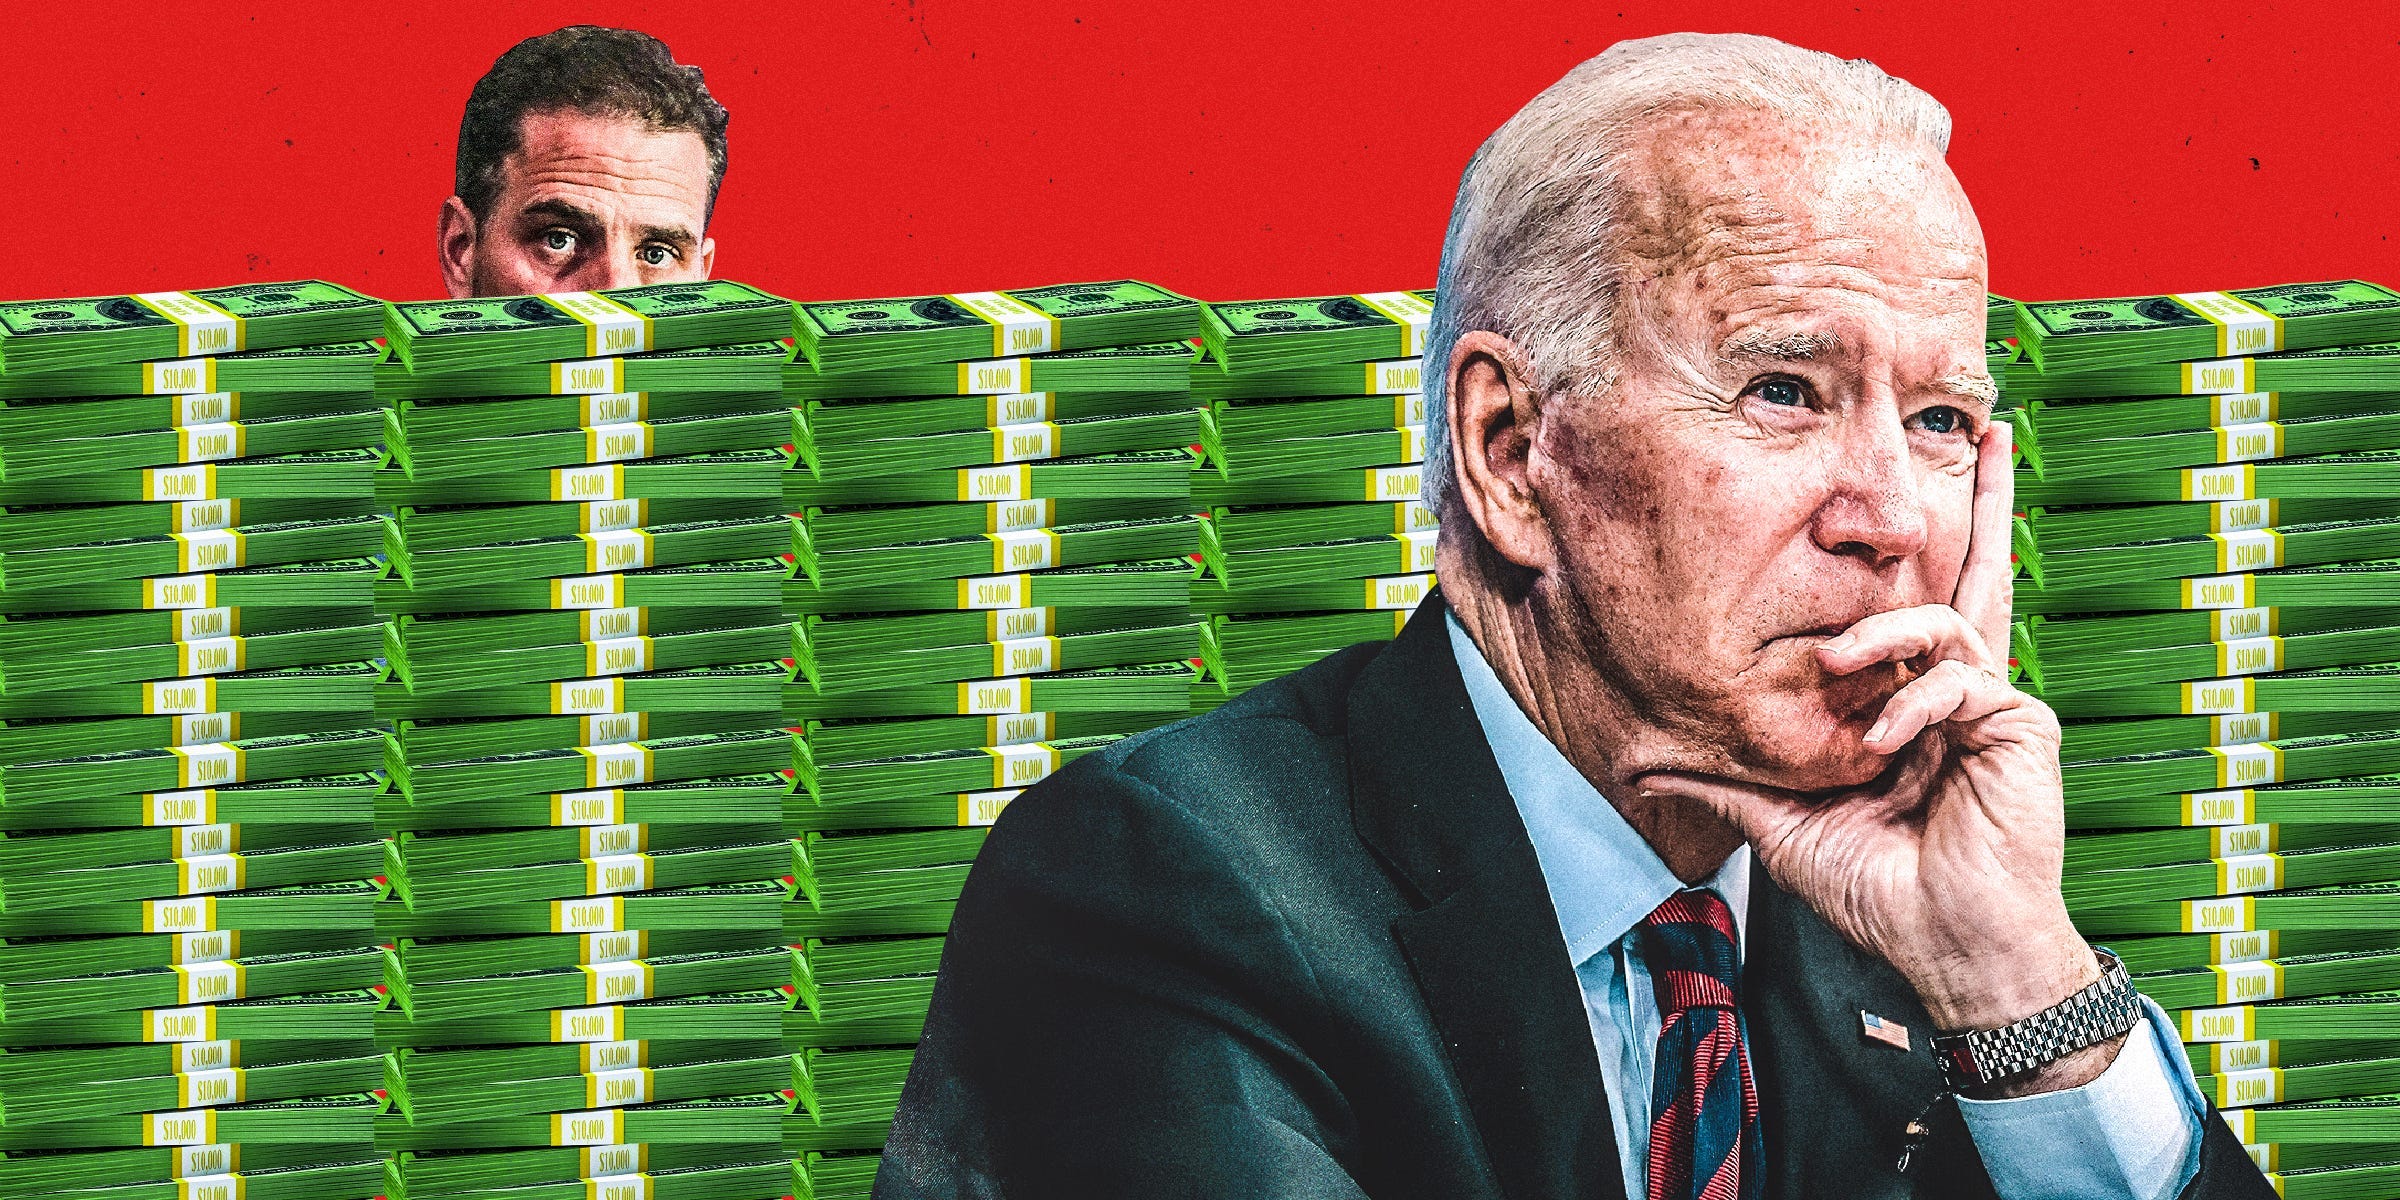 Hunter Biden looking over a wall of money. Joe Biden is in front not paying attention to him. The background is red.